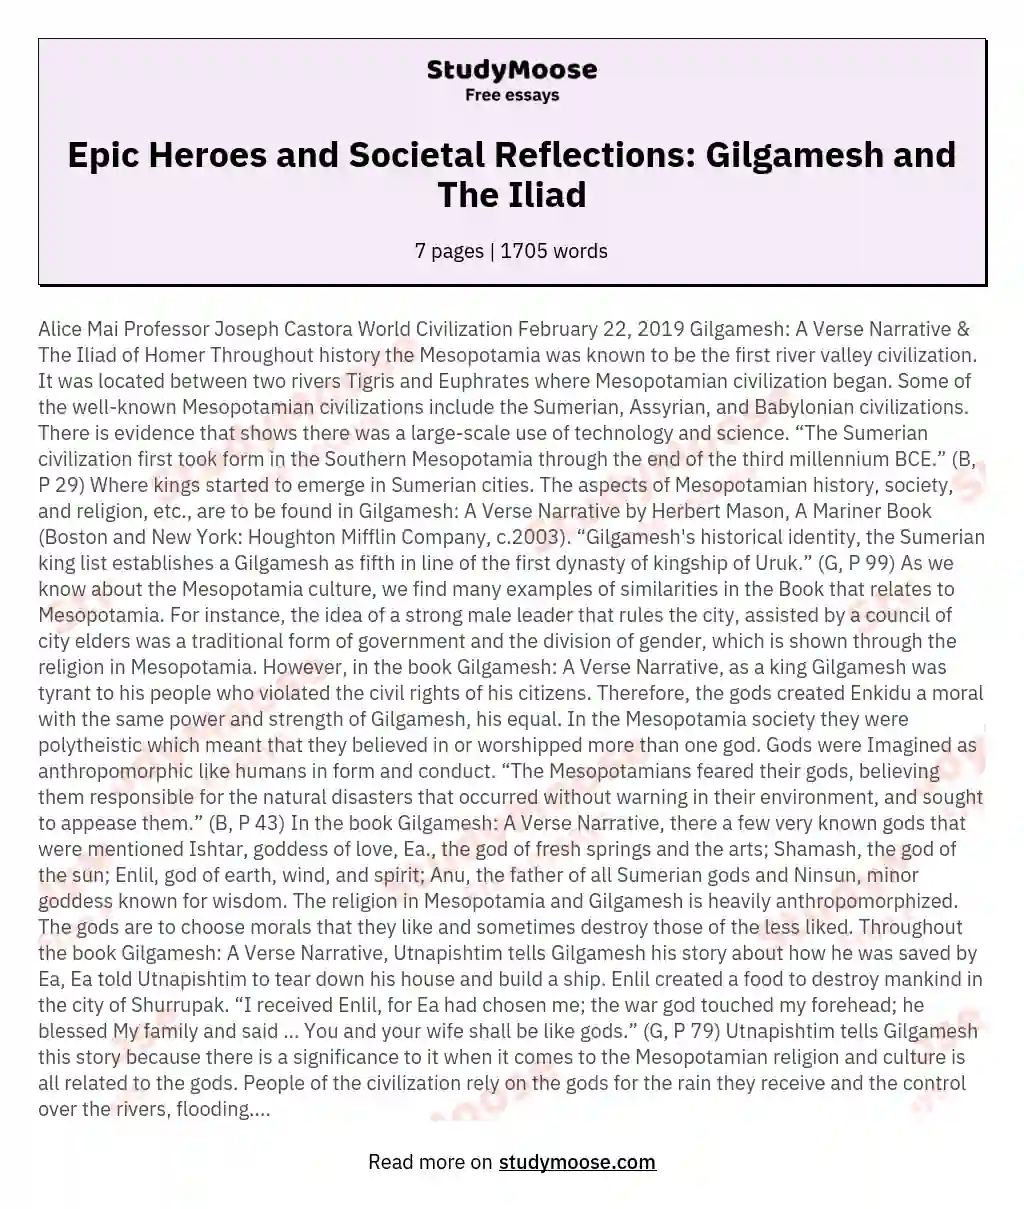 Epic Heroes and Societal Reflections: Gilgamesh and The Iliad essay